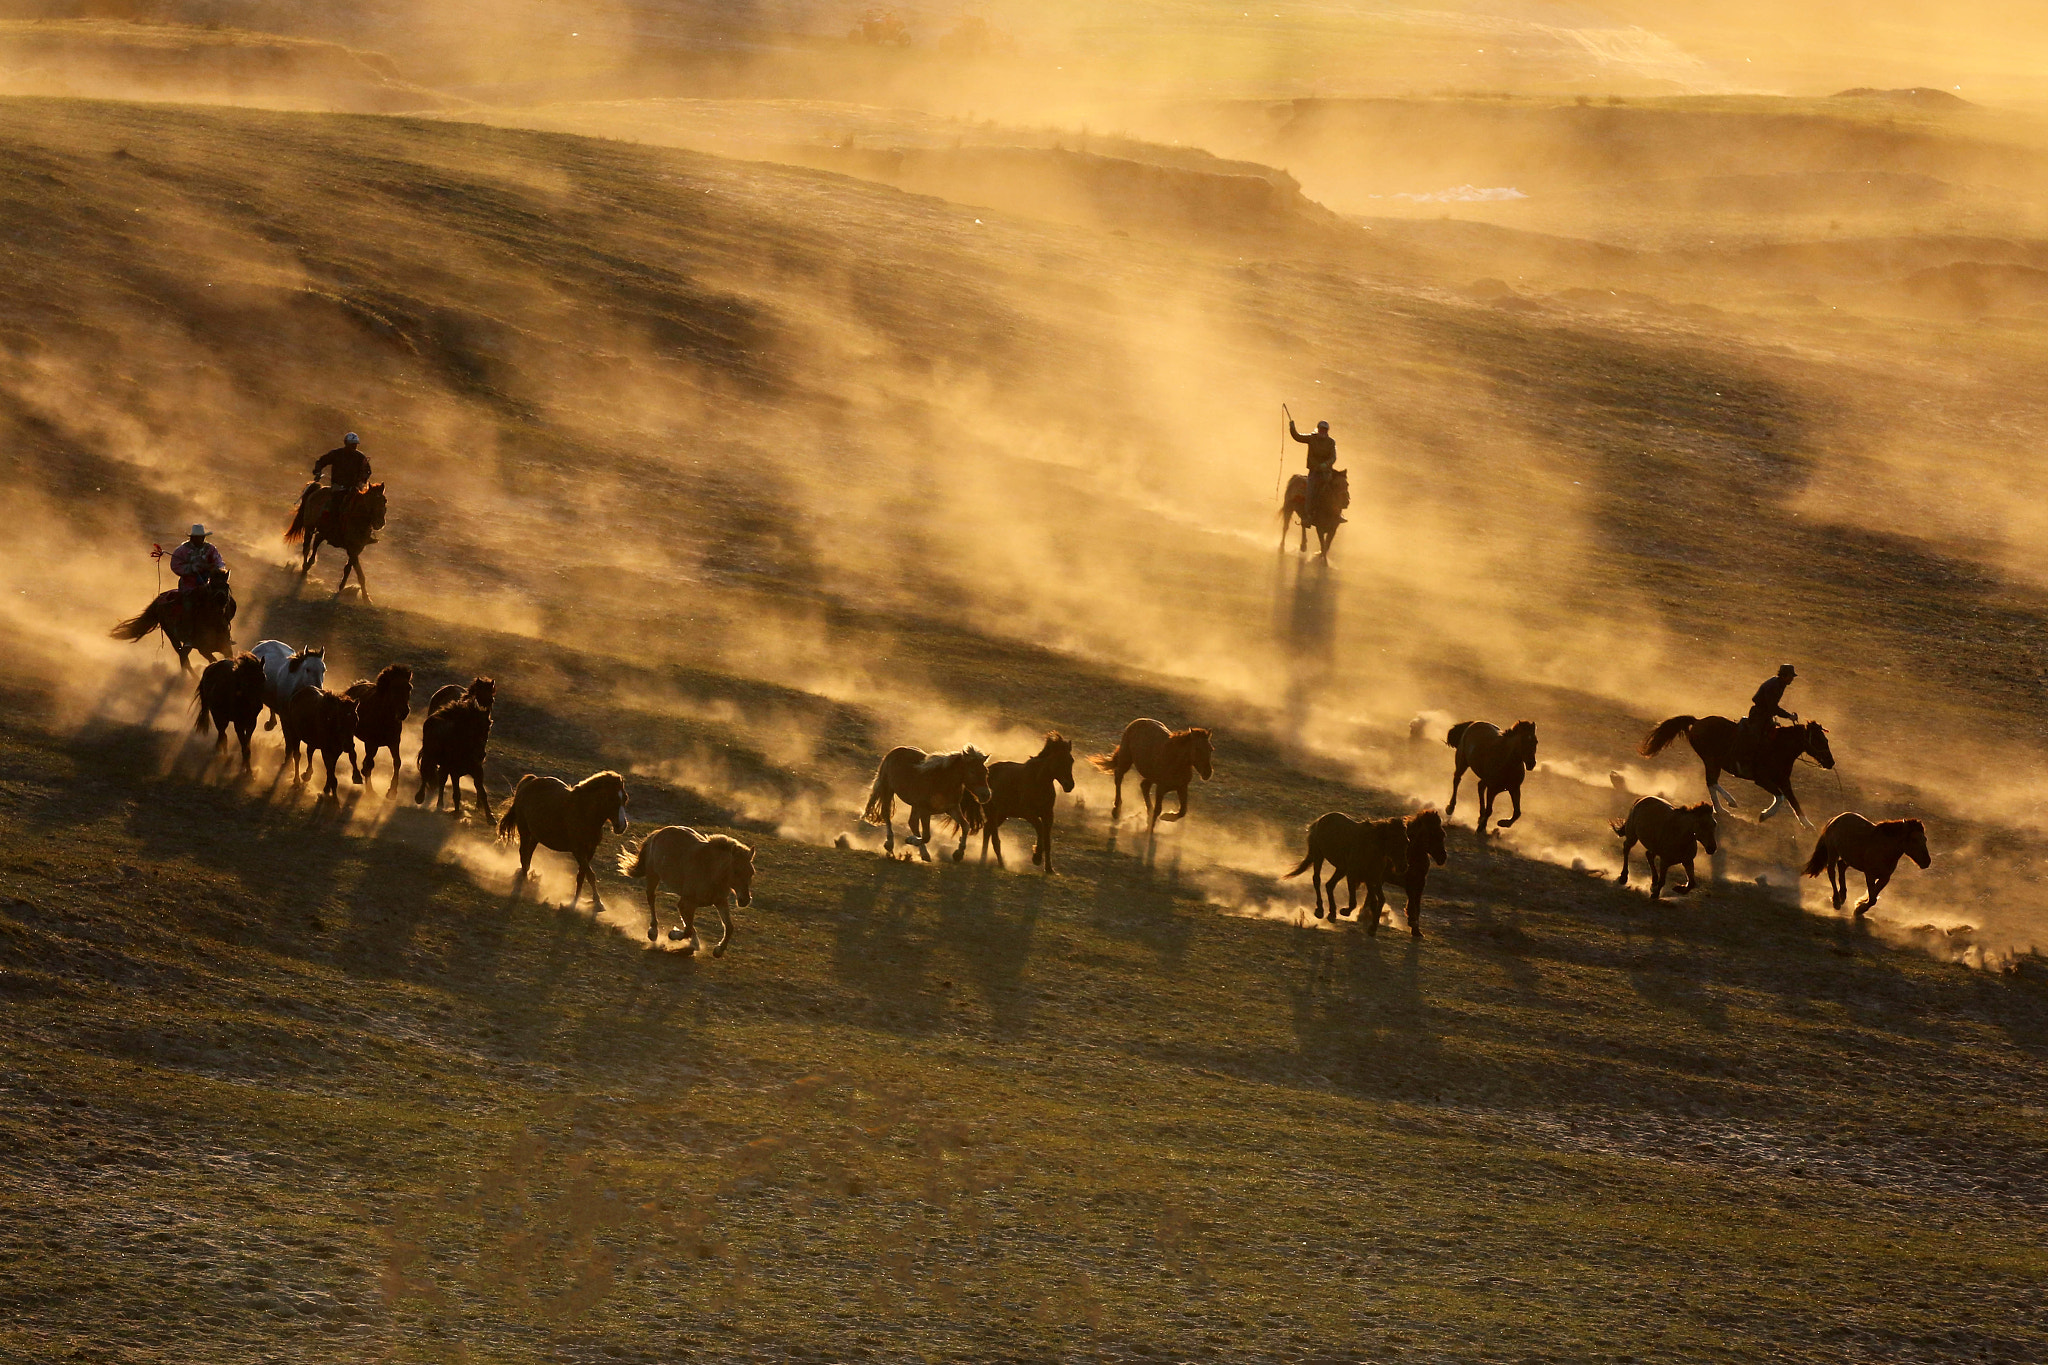 Mongolia Horses by Libby Zhang / 500px